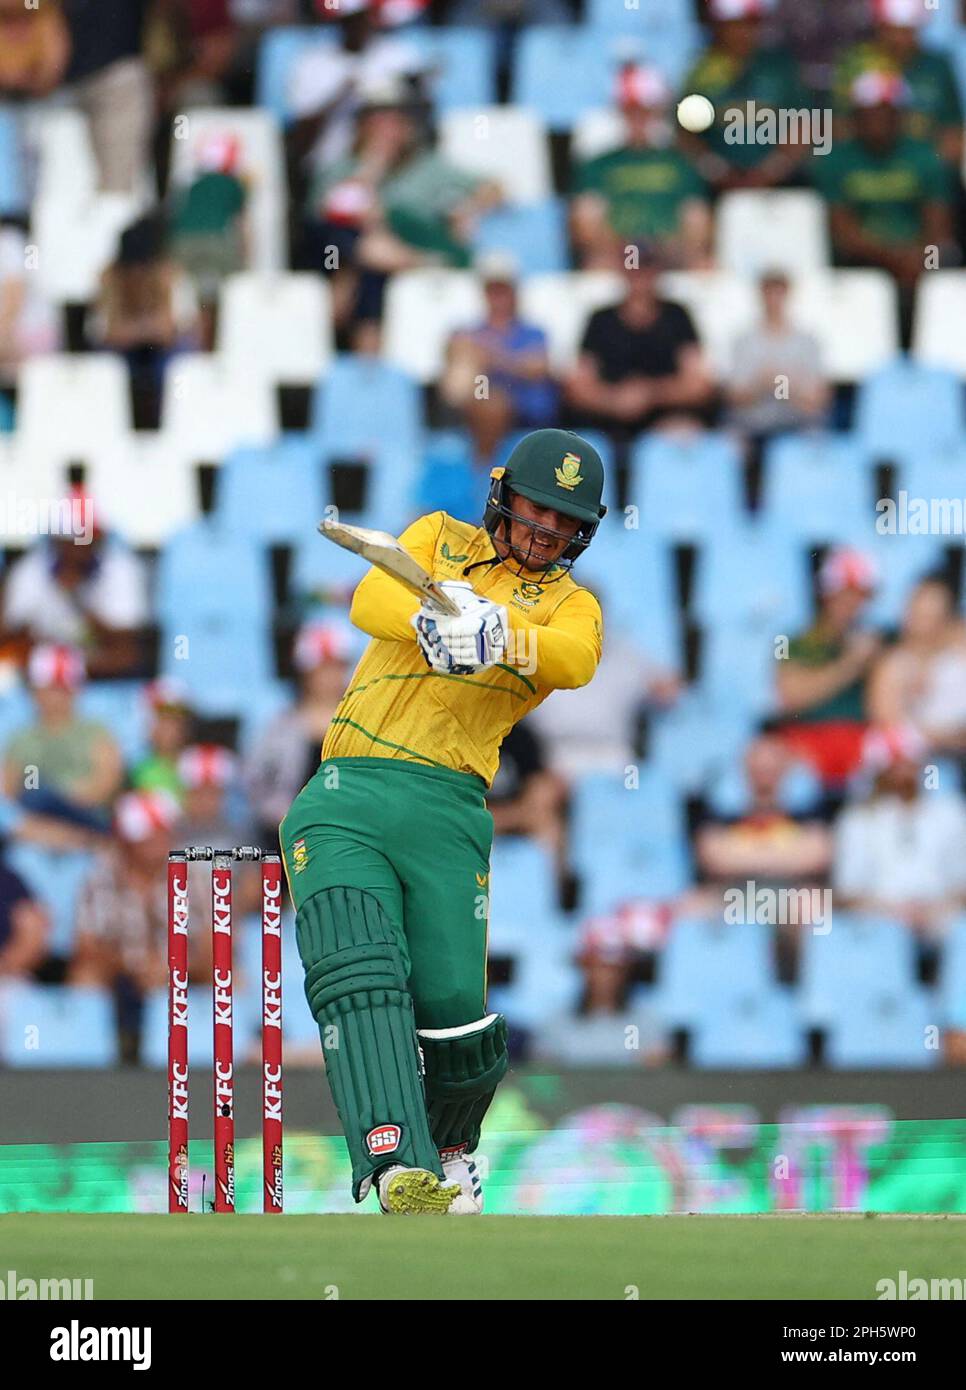 Cricket - Second Twenty20 - South Africa v West Indies - SuperSport Park Cricket Stadium, Centurion, South Africa - March 26, 2023  South Africa's Quinton de Kock hits the ball and is caught out by Rovman Powell off the bowling of Raymon Reifer REUTERS/Siphiwe Sibeko Stock Photo